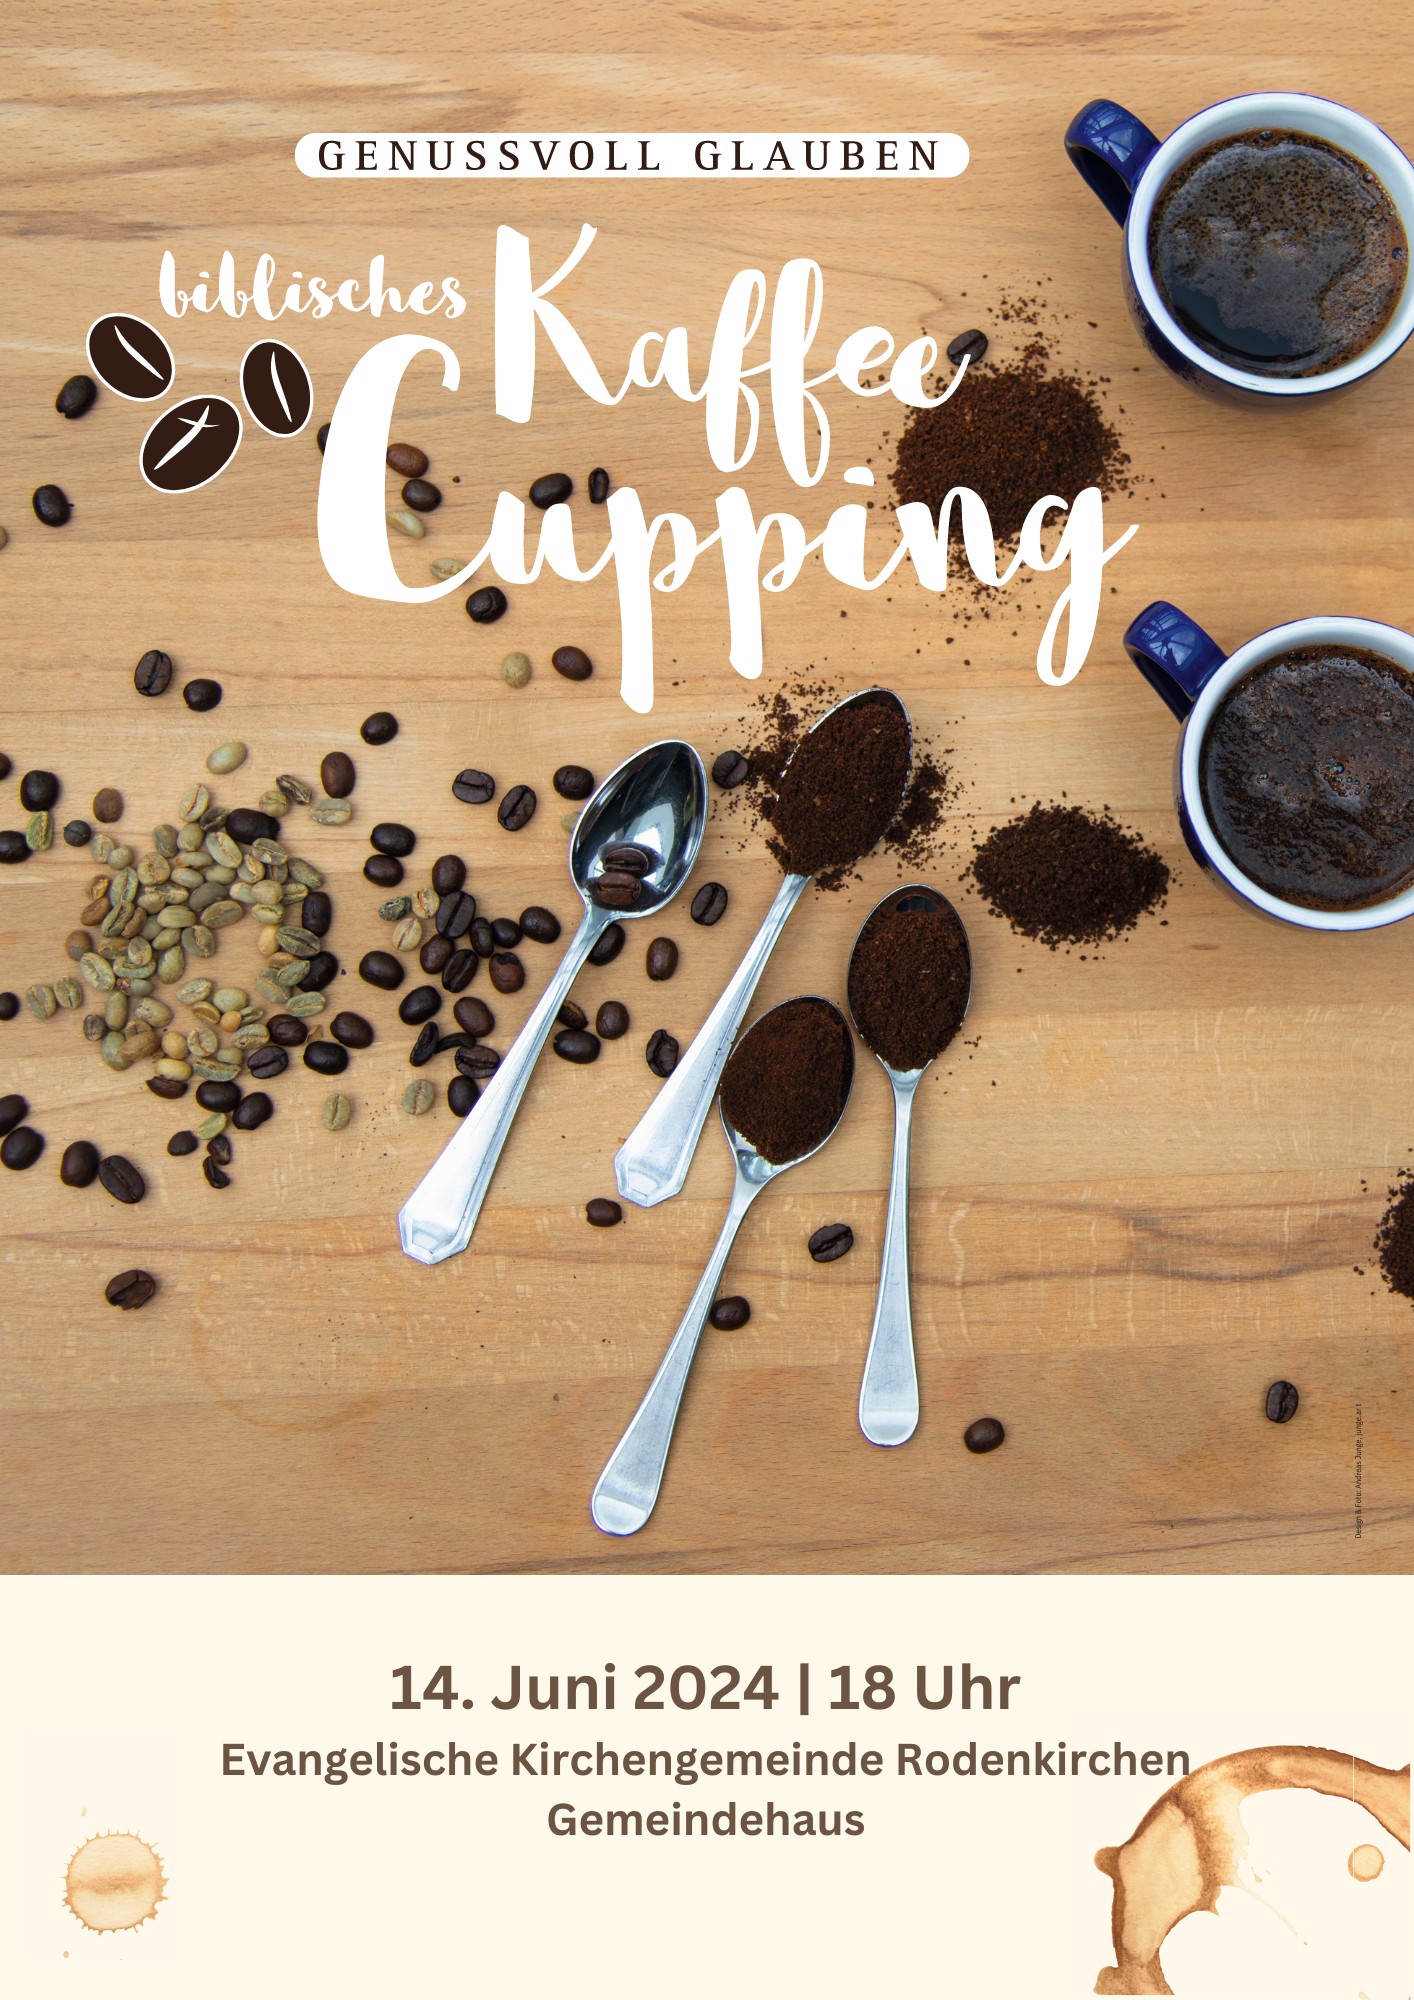 You are currently viewing Genussvoll glauben – Biblisches Kaffee Cupping